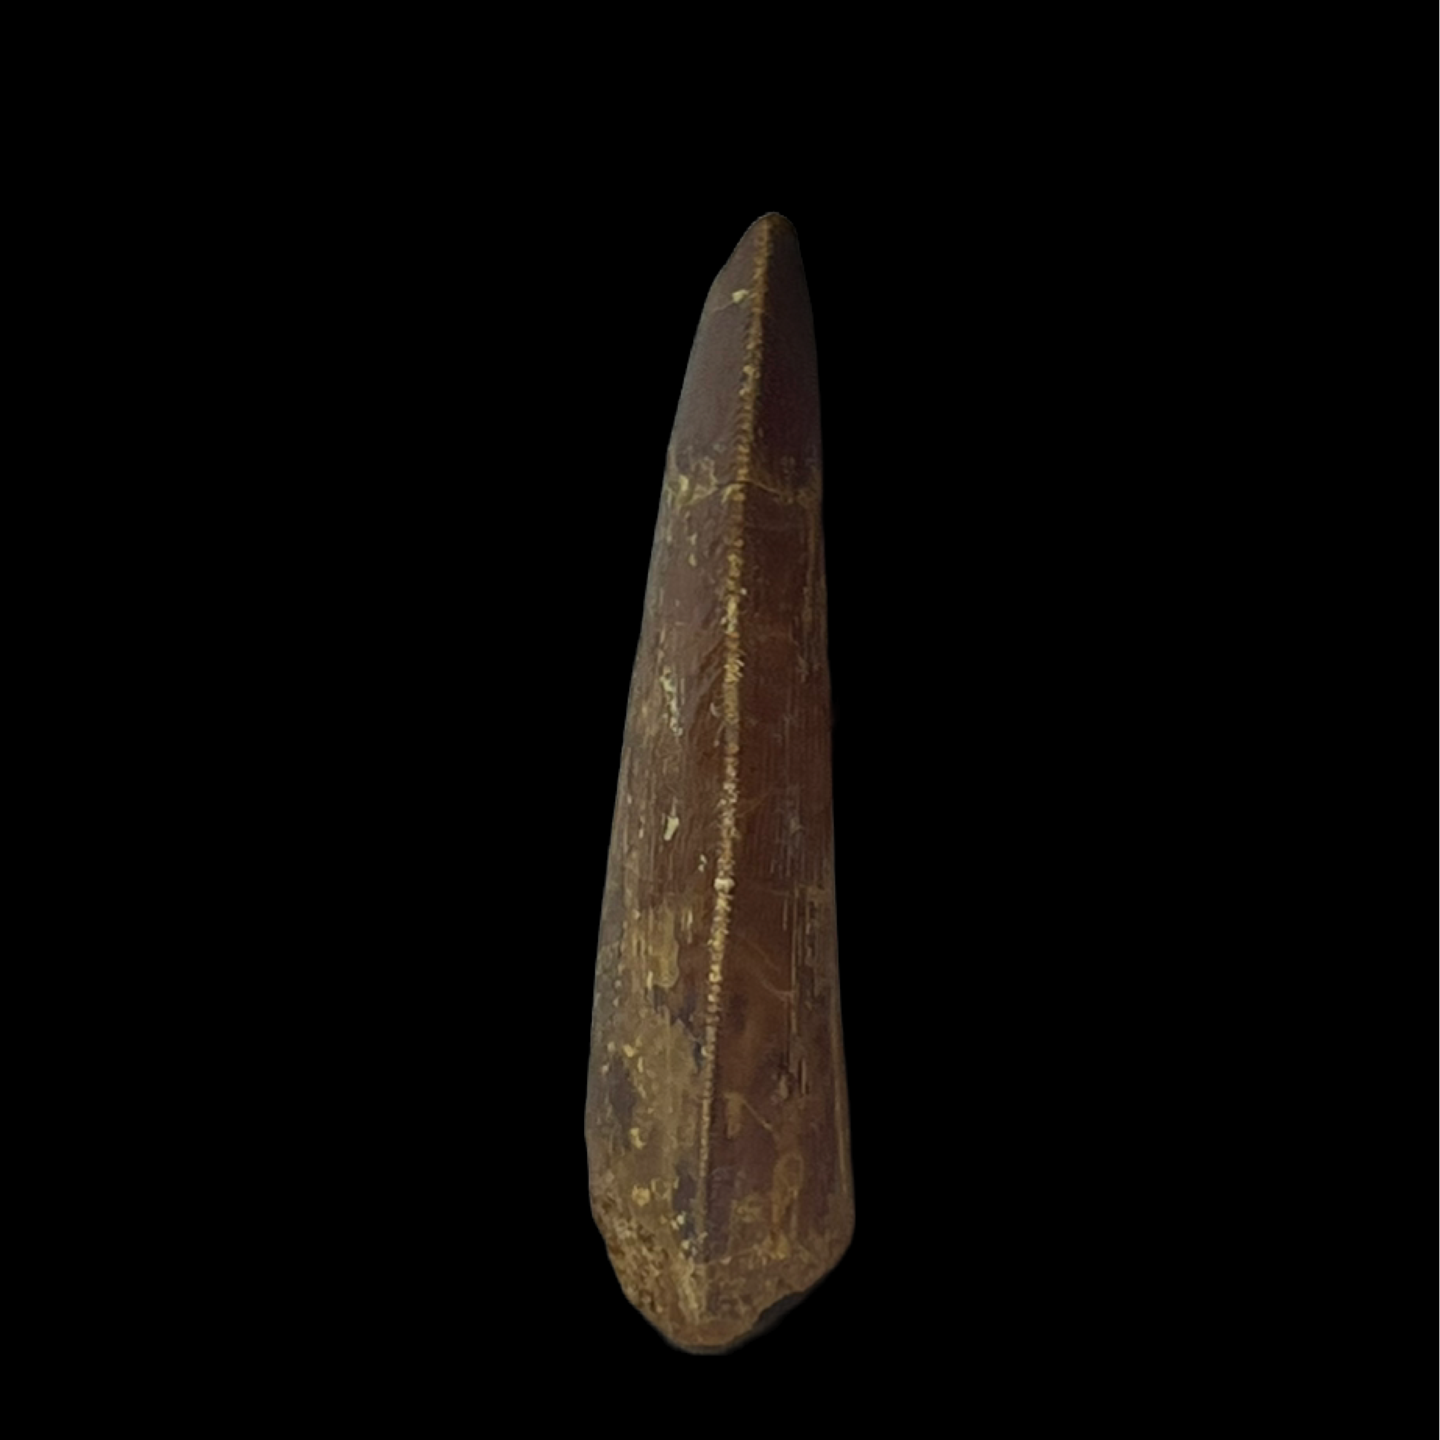 Carcharodontosaurus Tooth 03 (2 in)